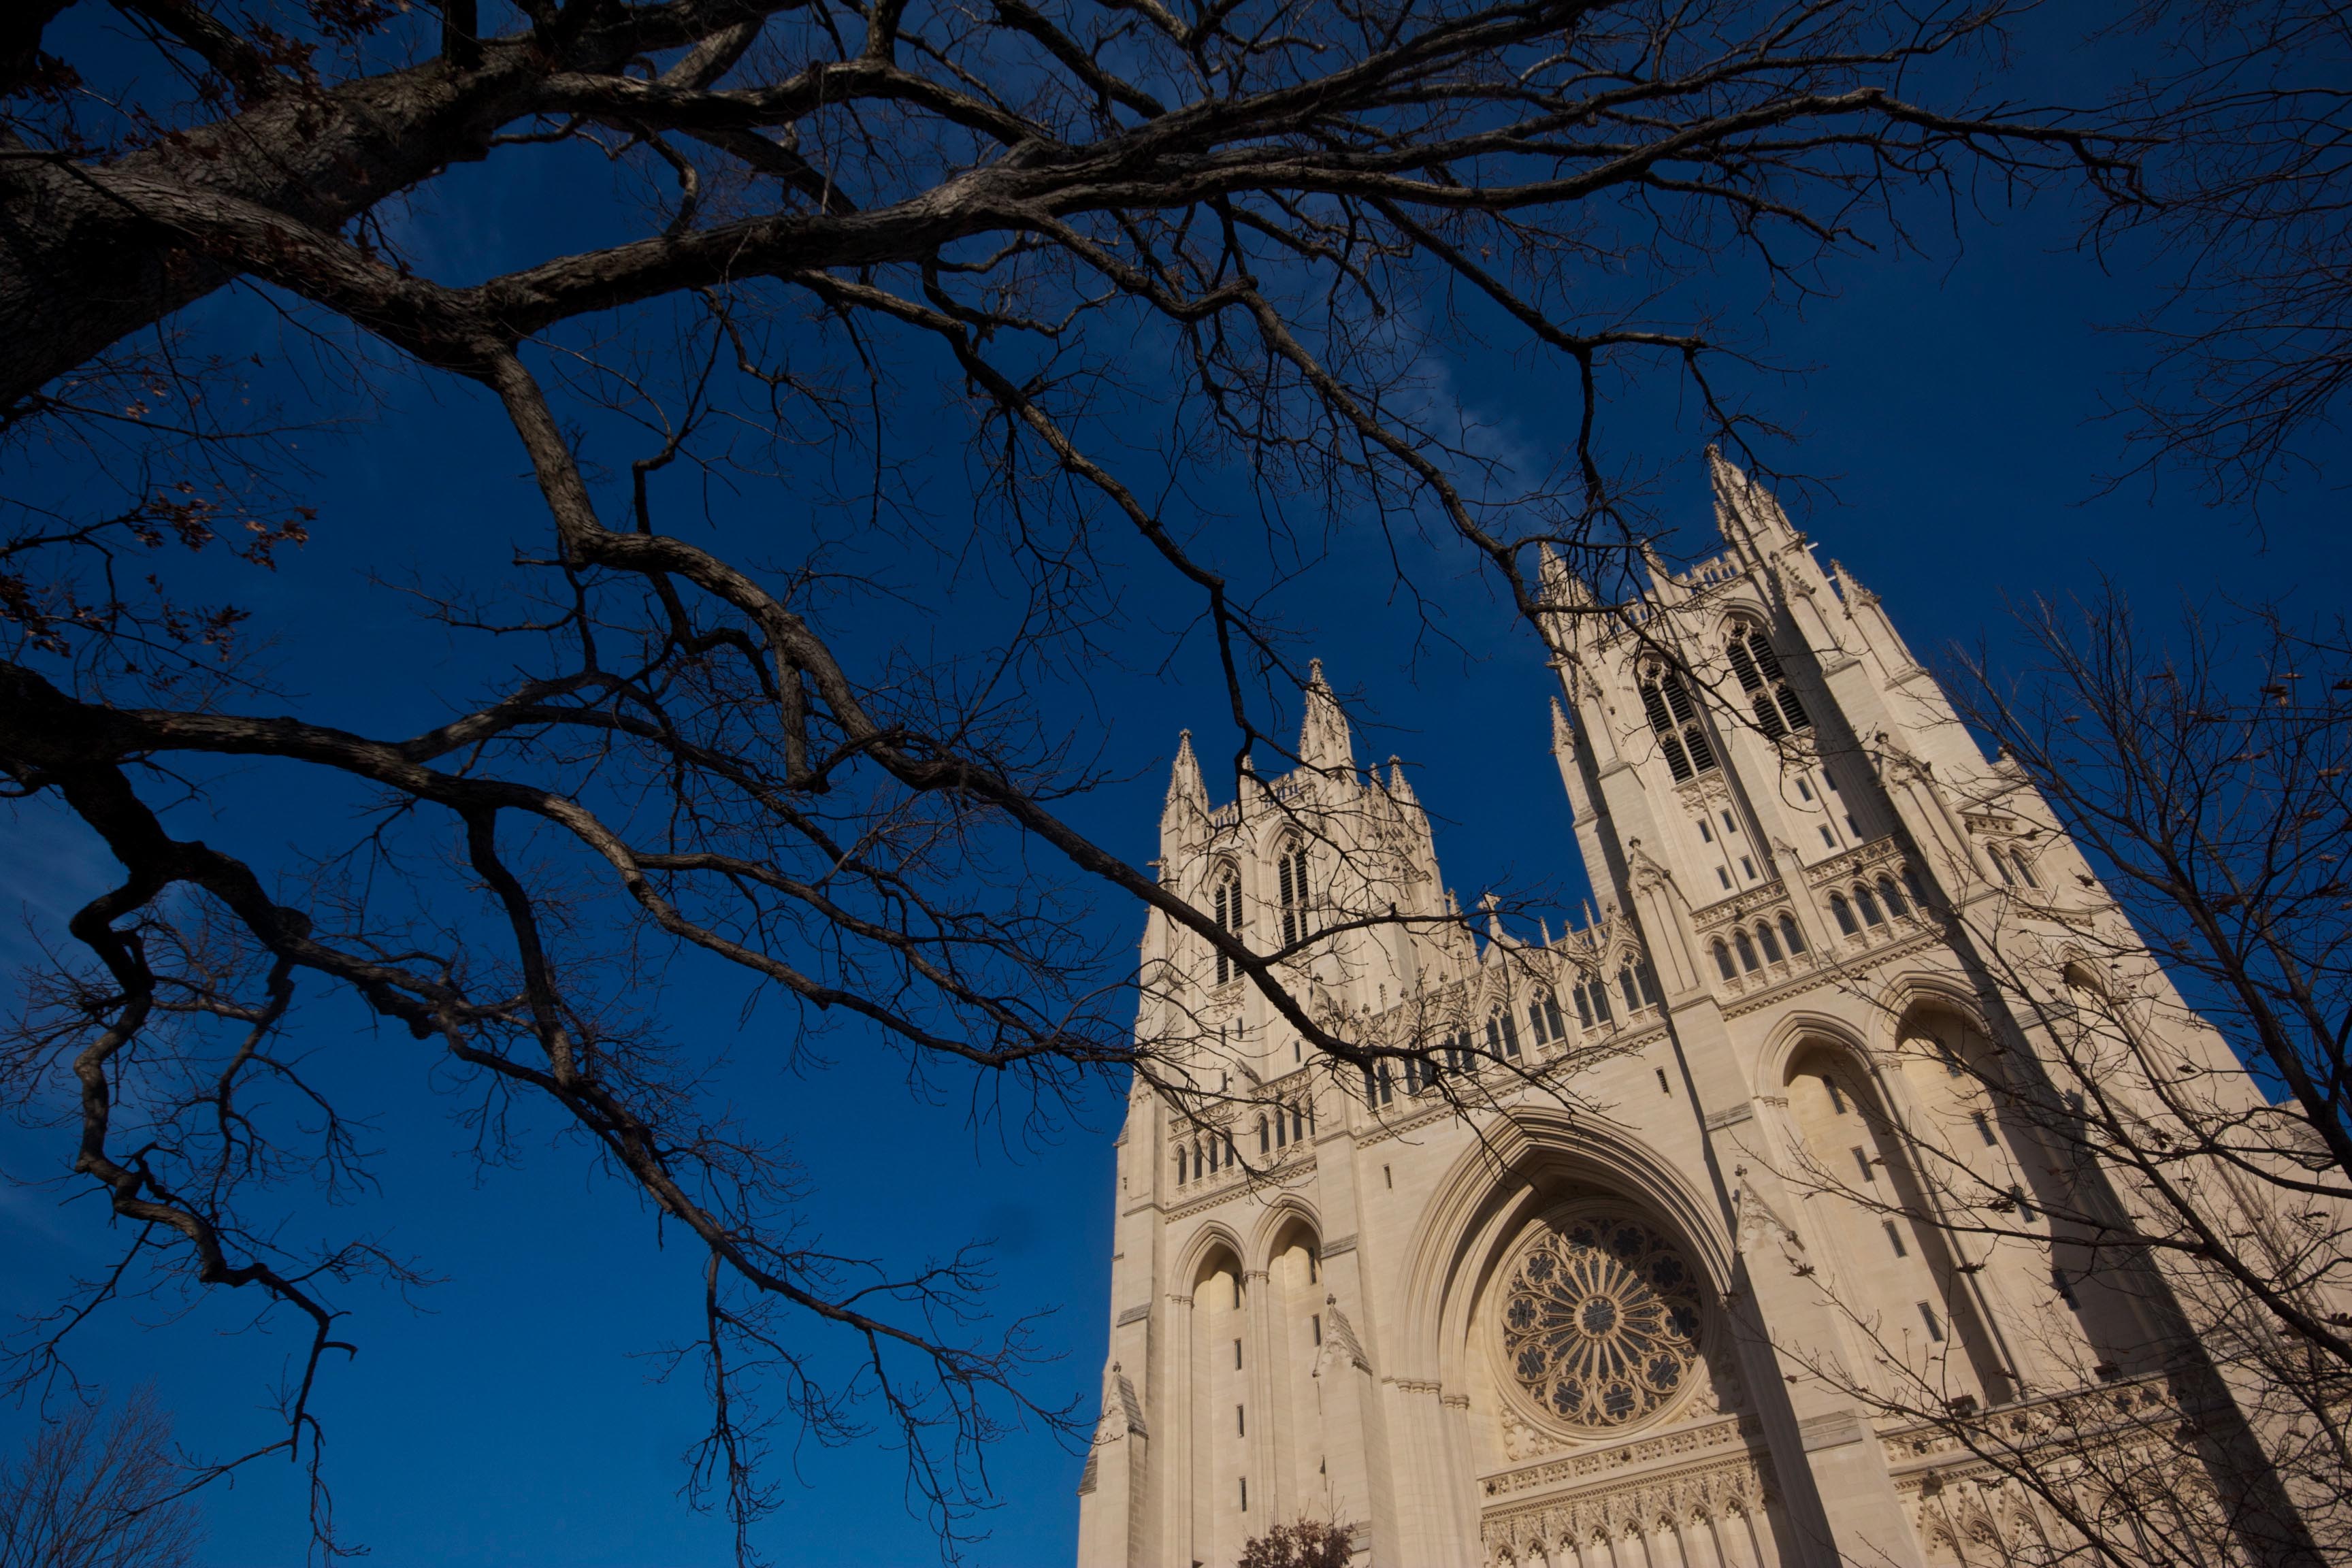 My happy place: At the National Cathedral in Washington D.C.